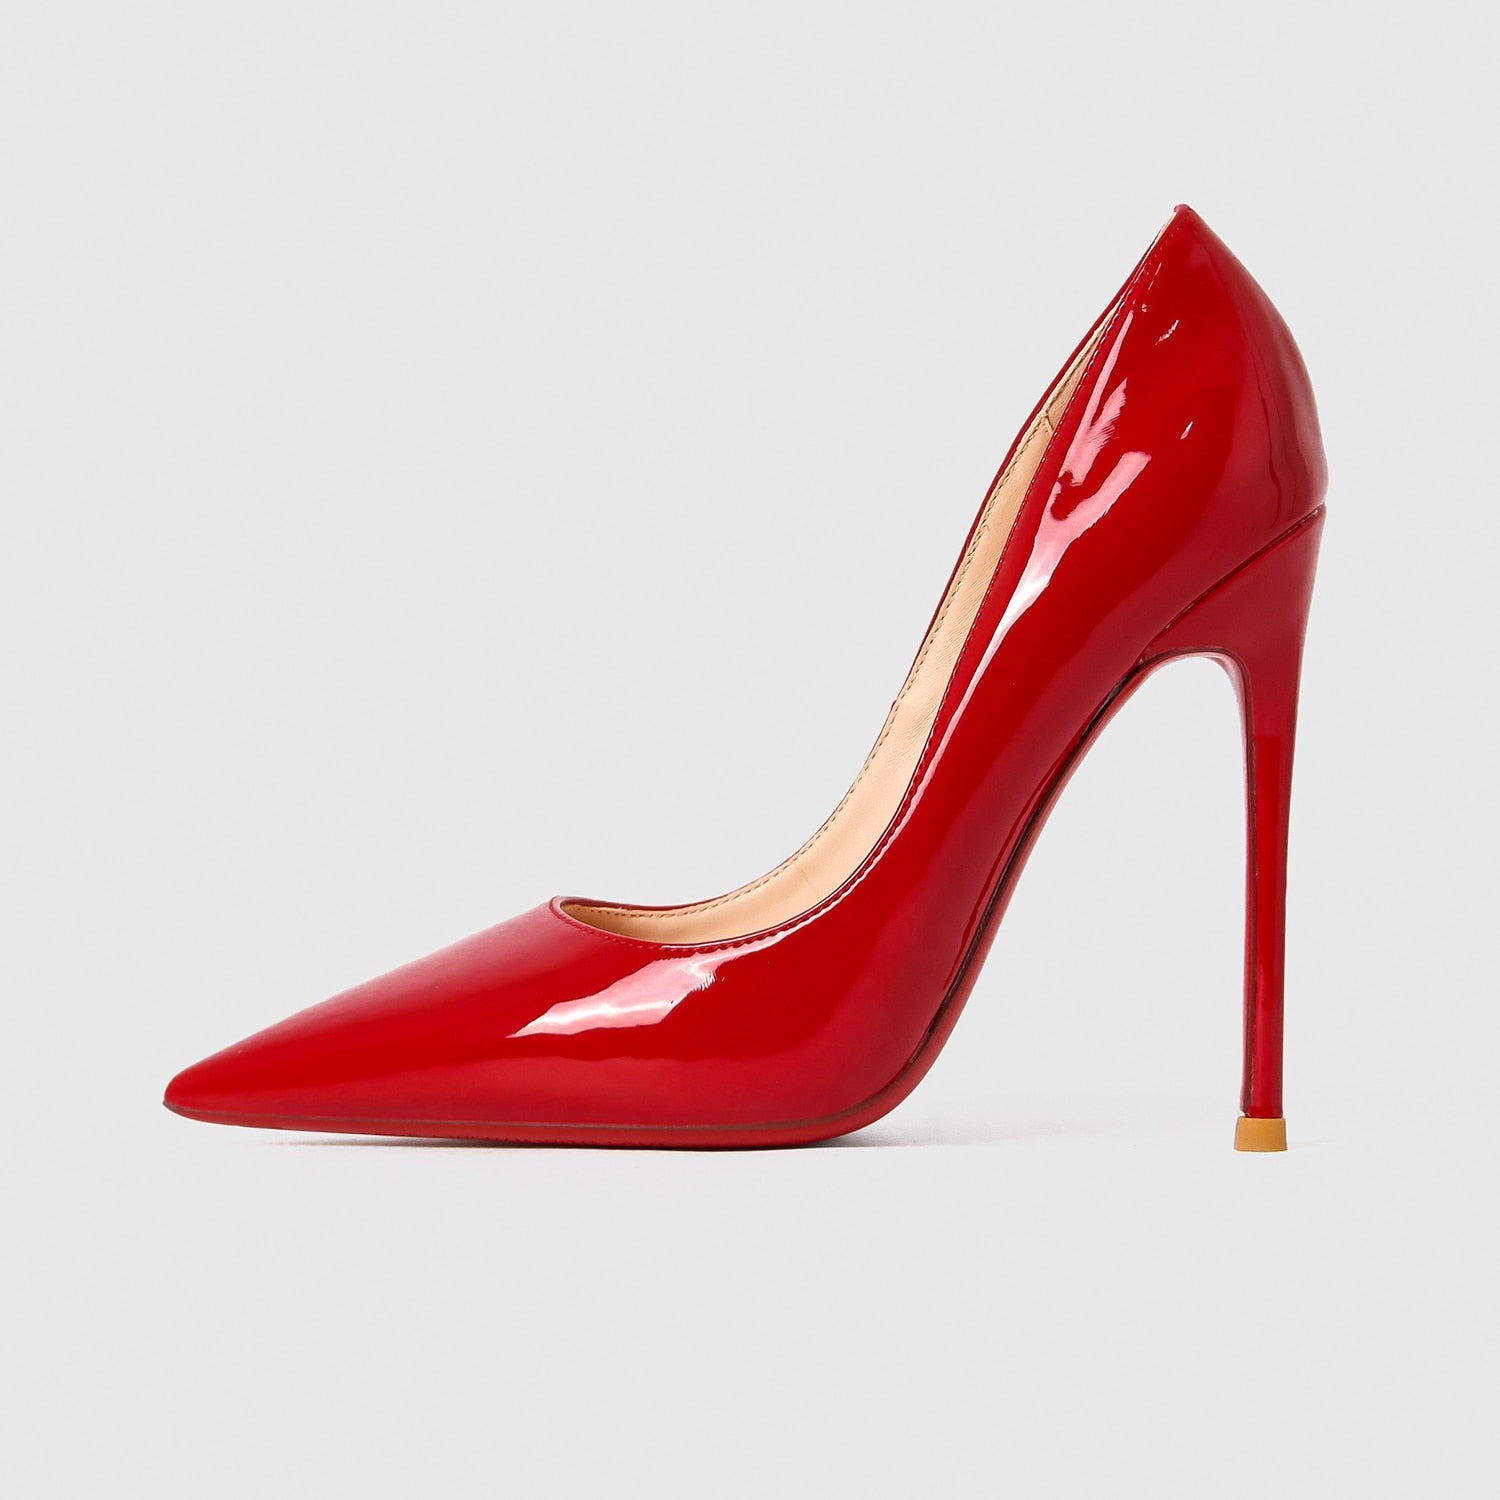 Red shiny high heels print by Maxim Images